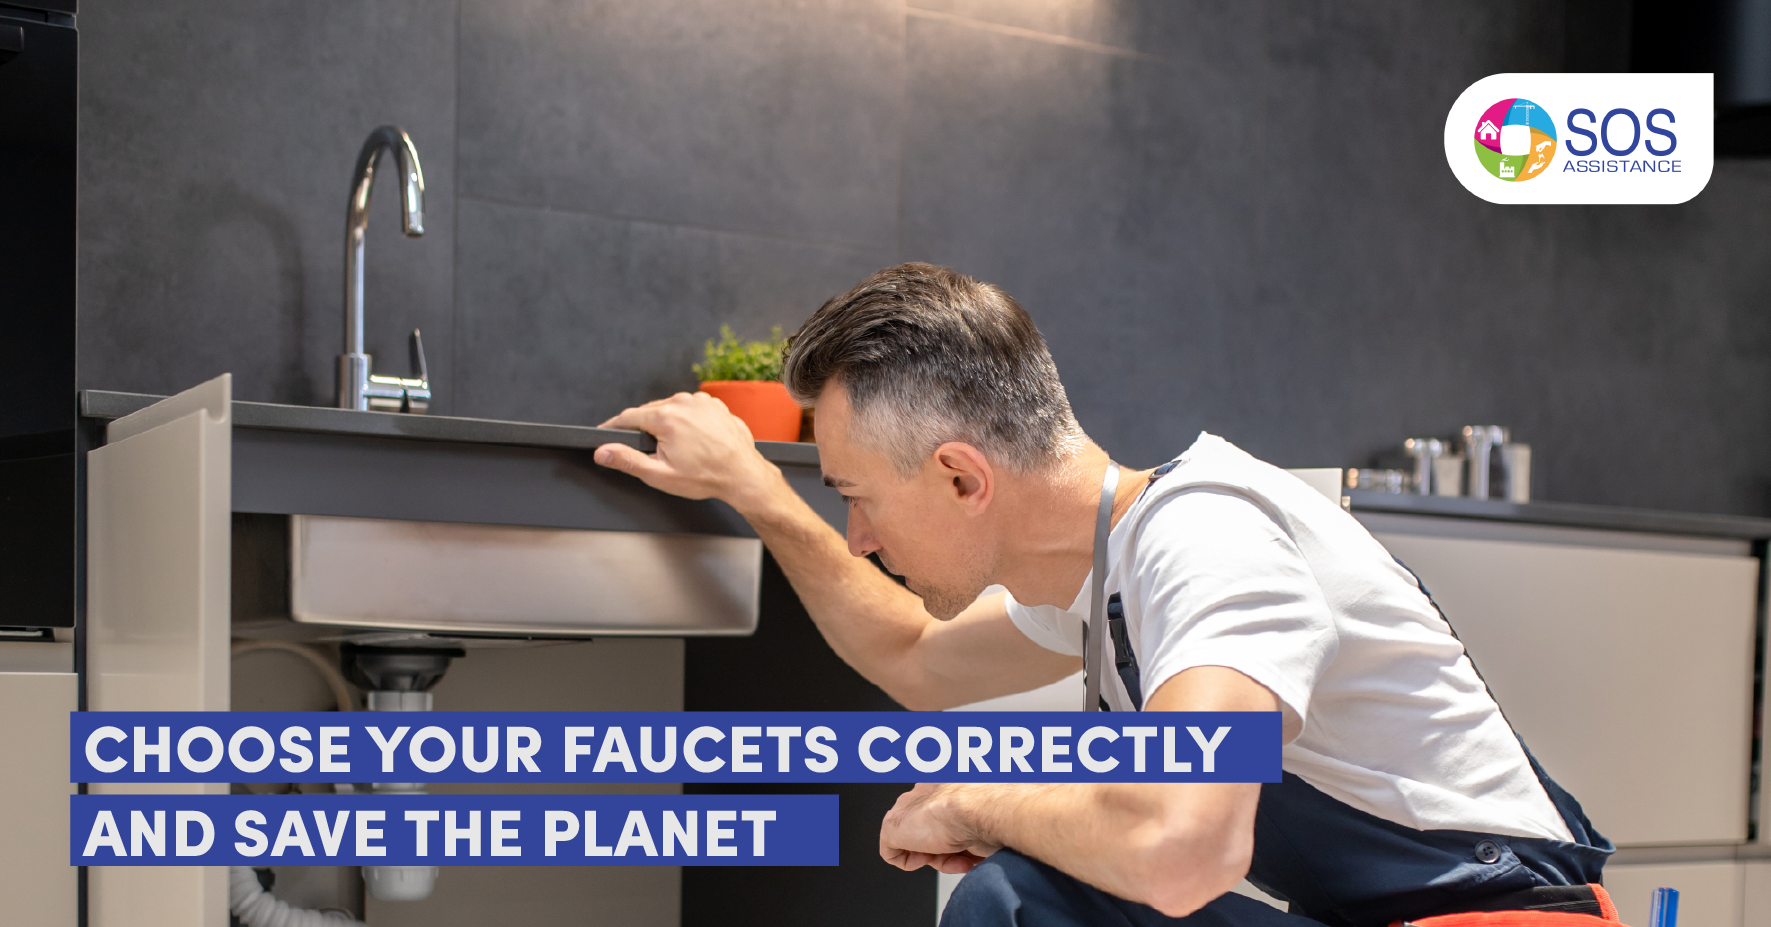 Choose your faucets correctly and save the planet